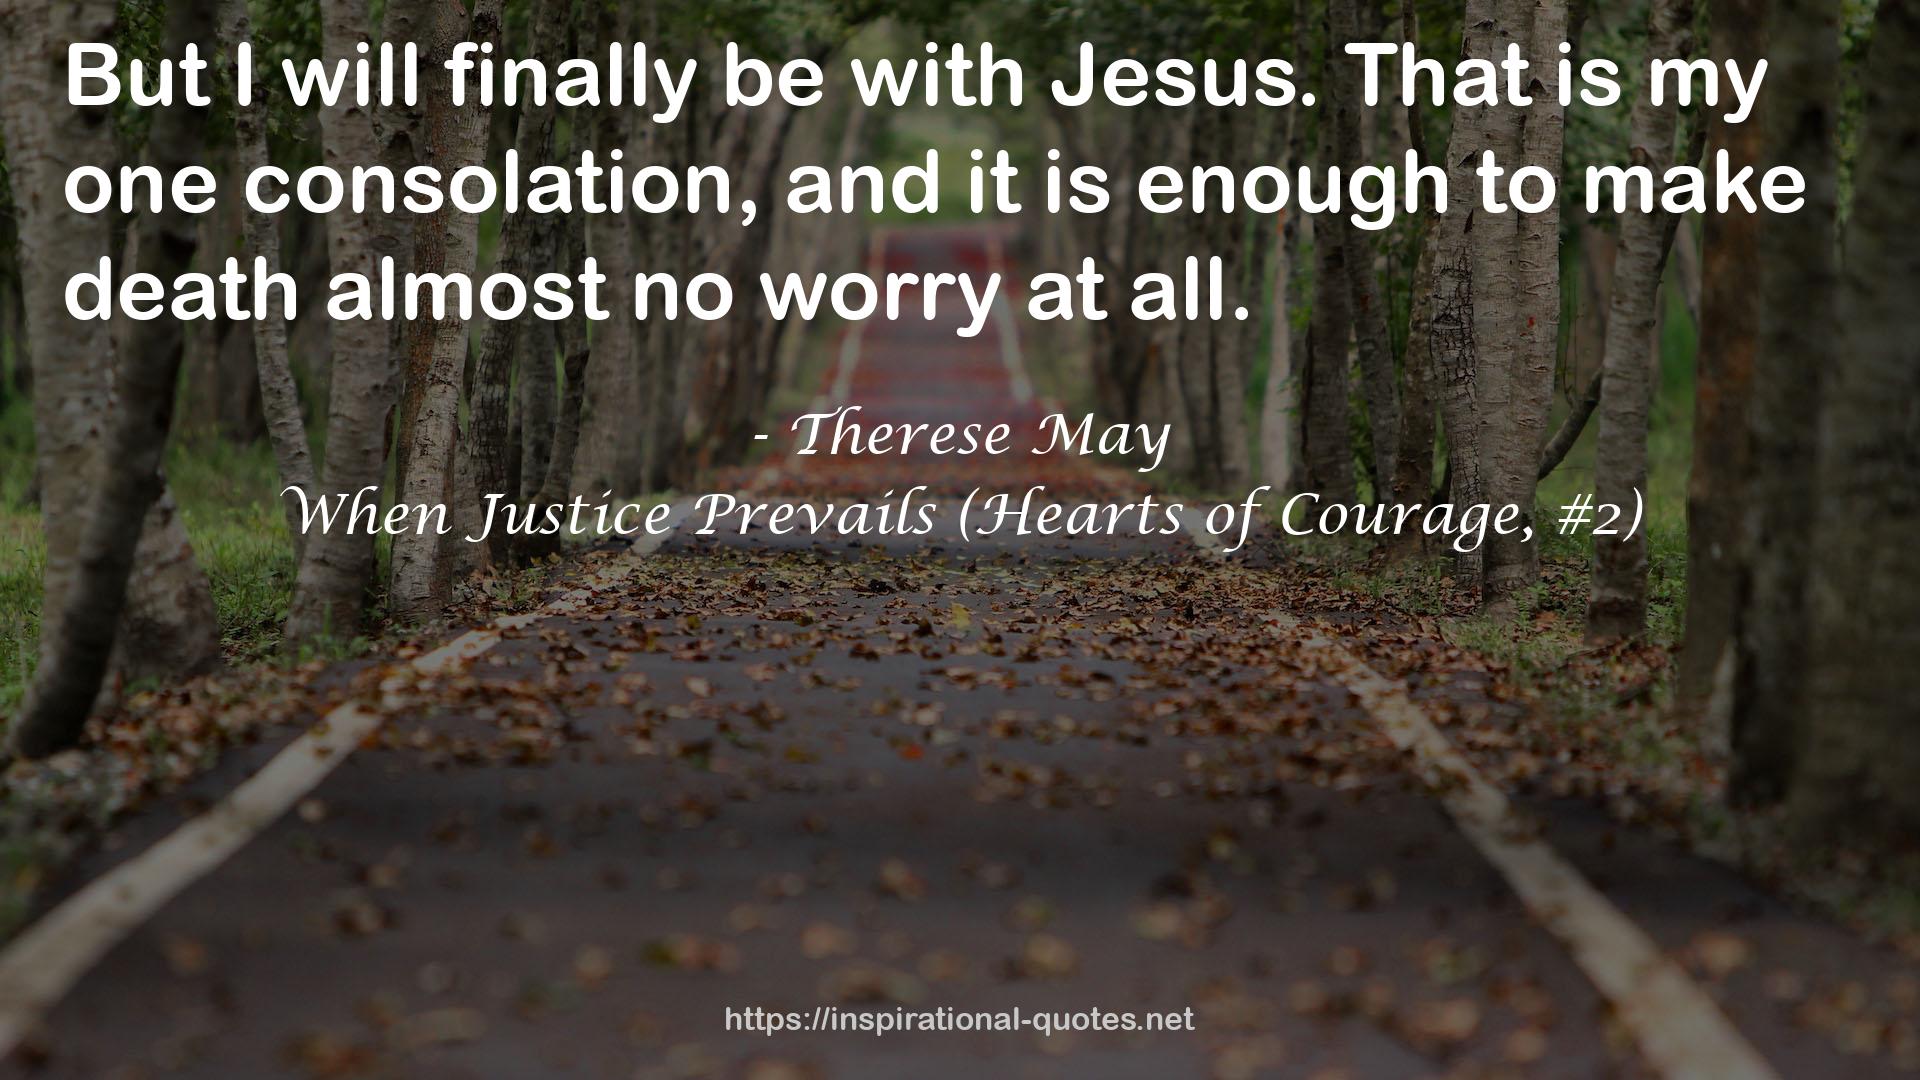 When Justice Prevails (Hearts of Courage, #2) QUOTES